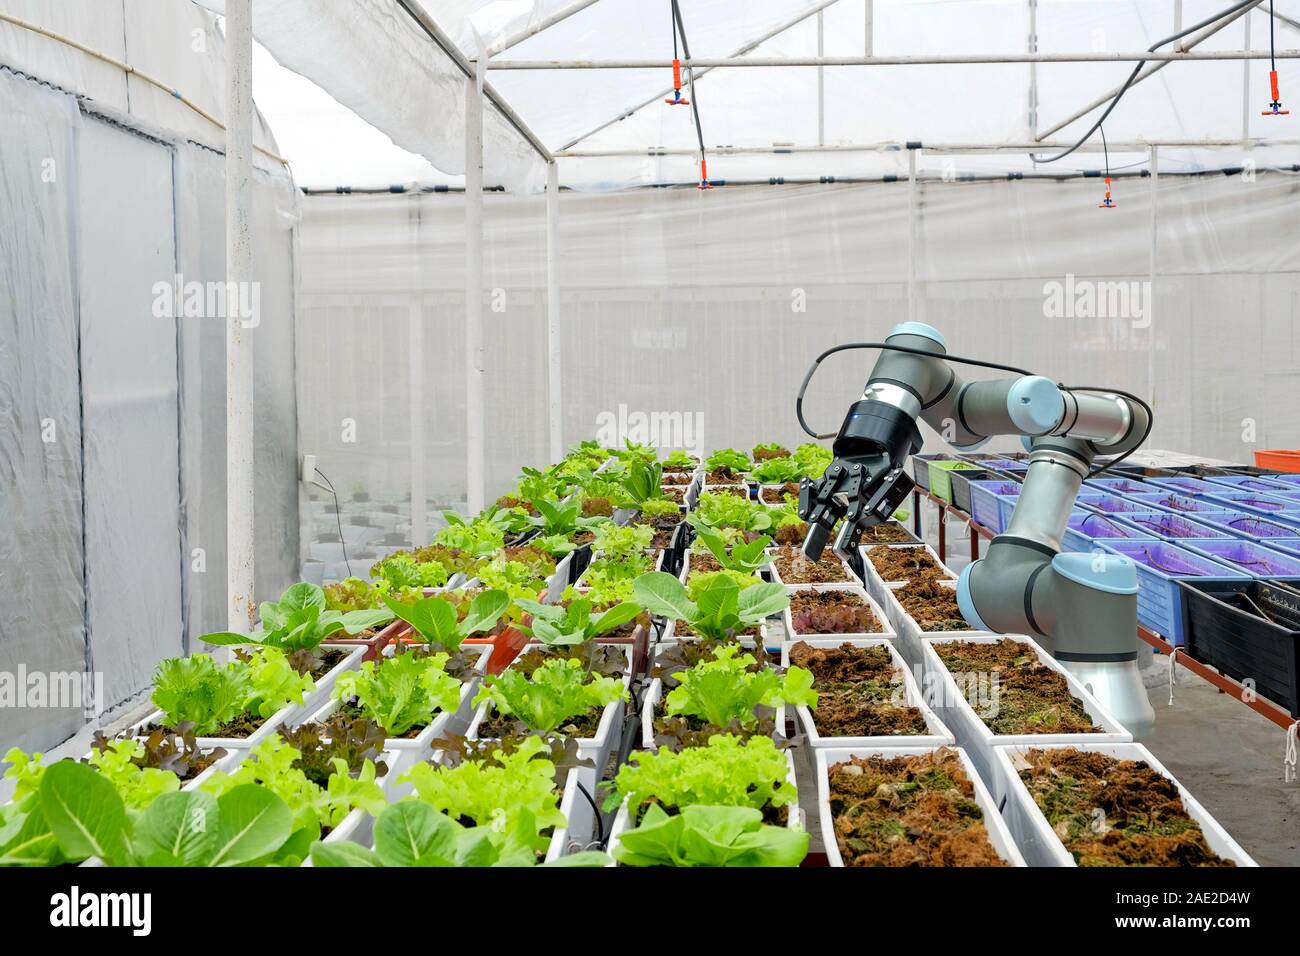 Industrial robotic  to apply for used in vegetable plots to work and help harvest on concept of Smart Farming  4.0 and Industry 4.0. Stock Photo